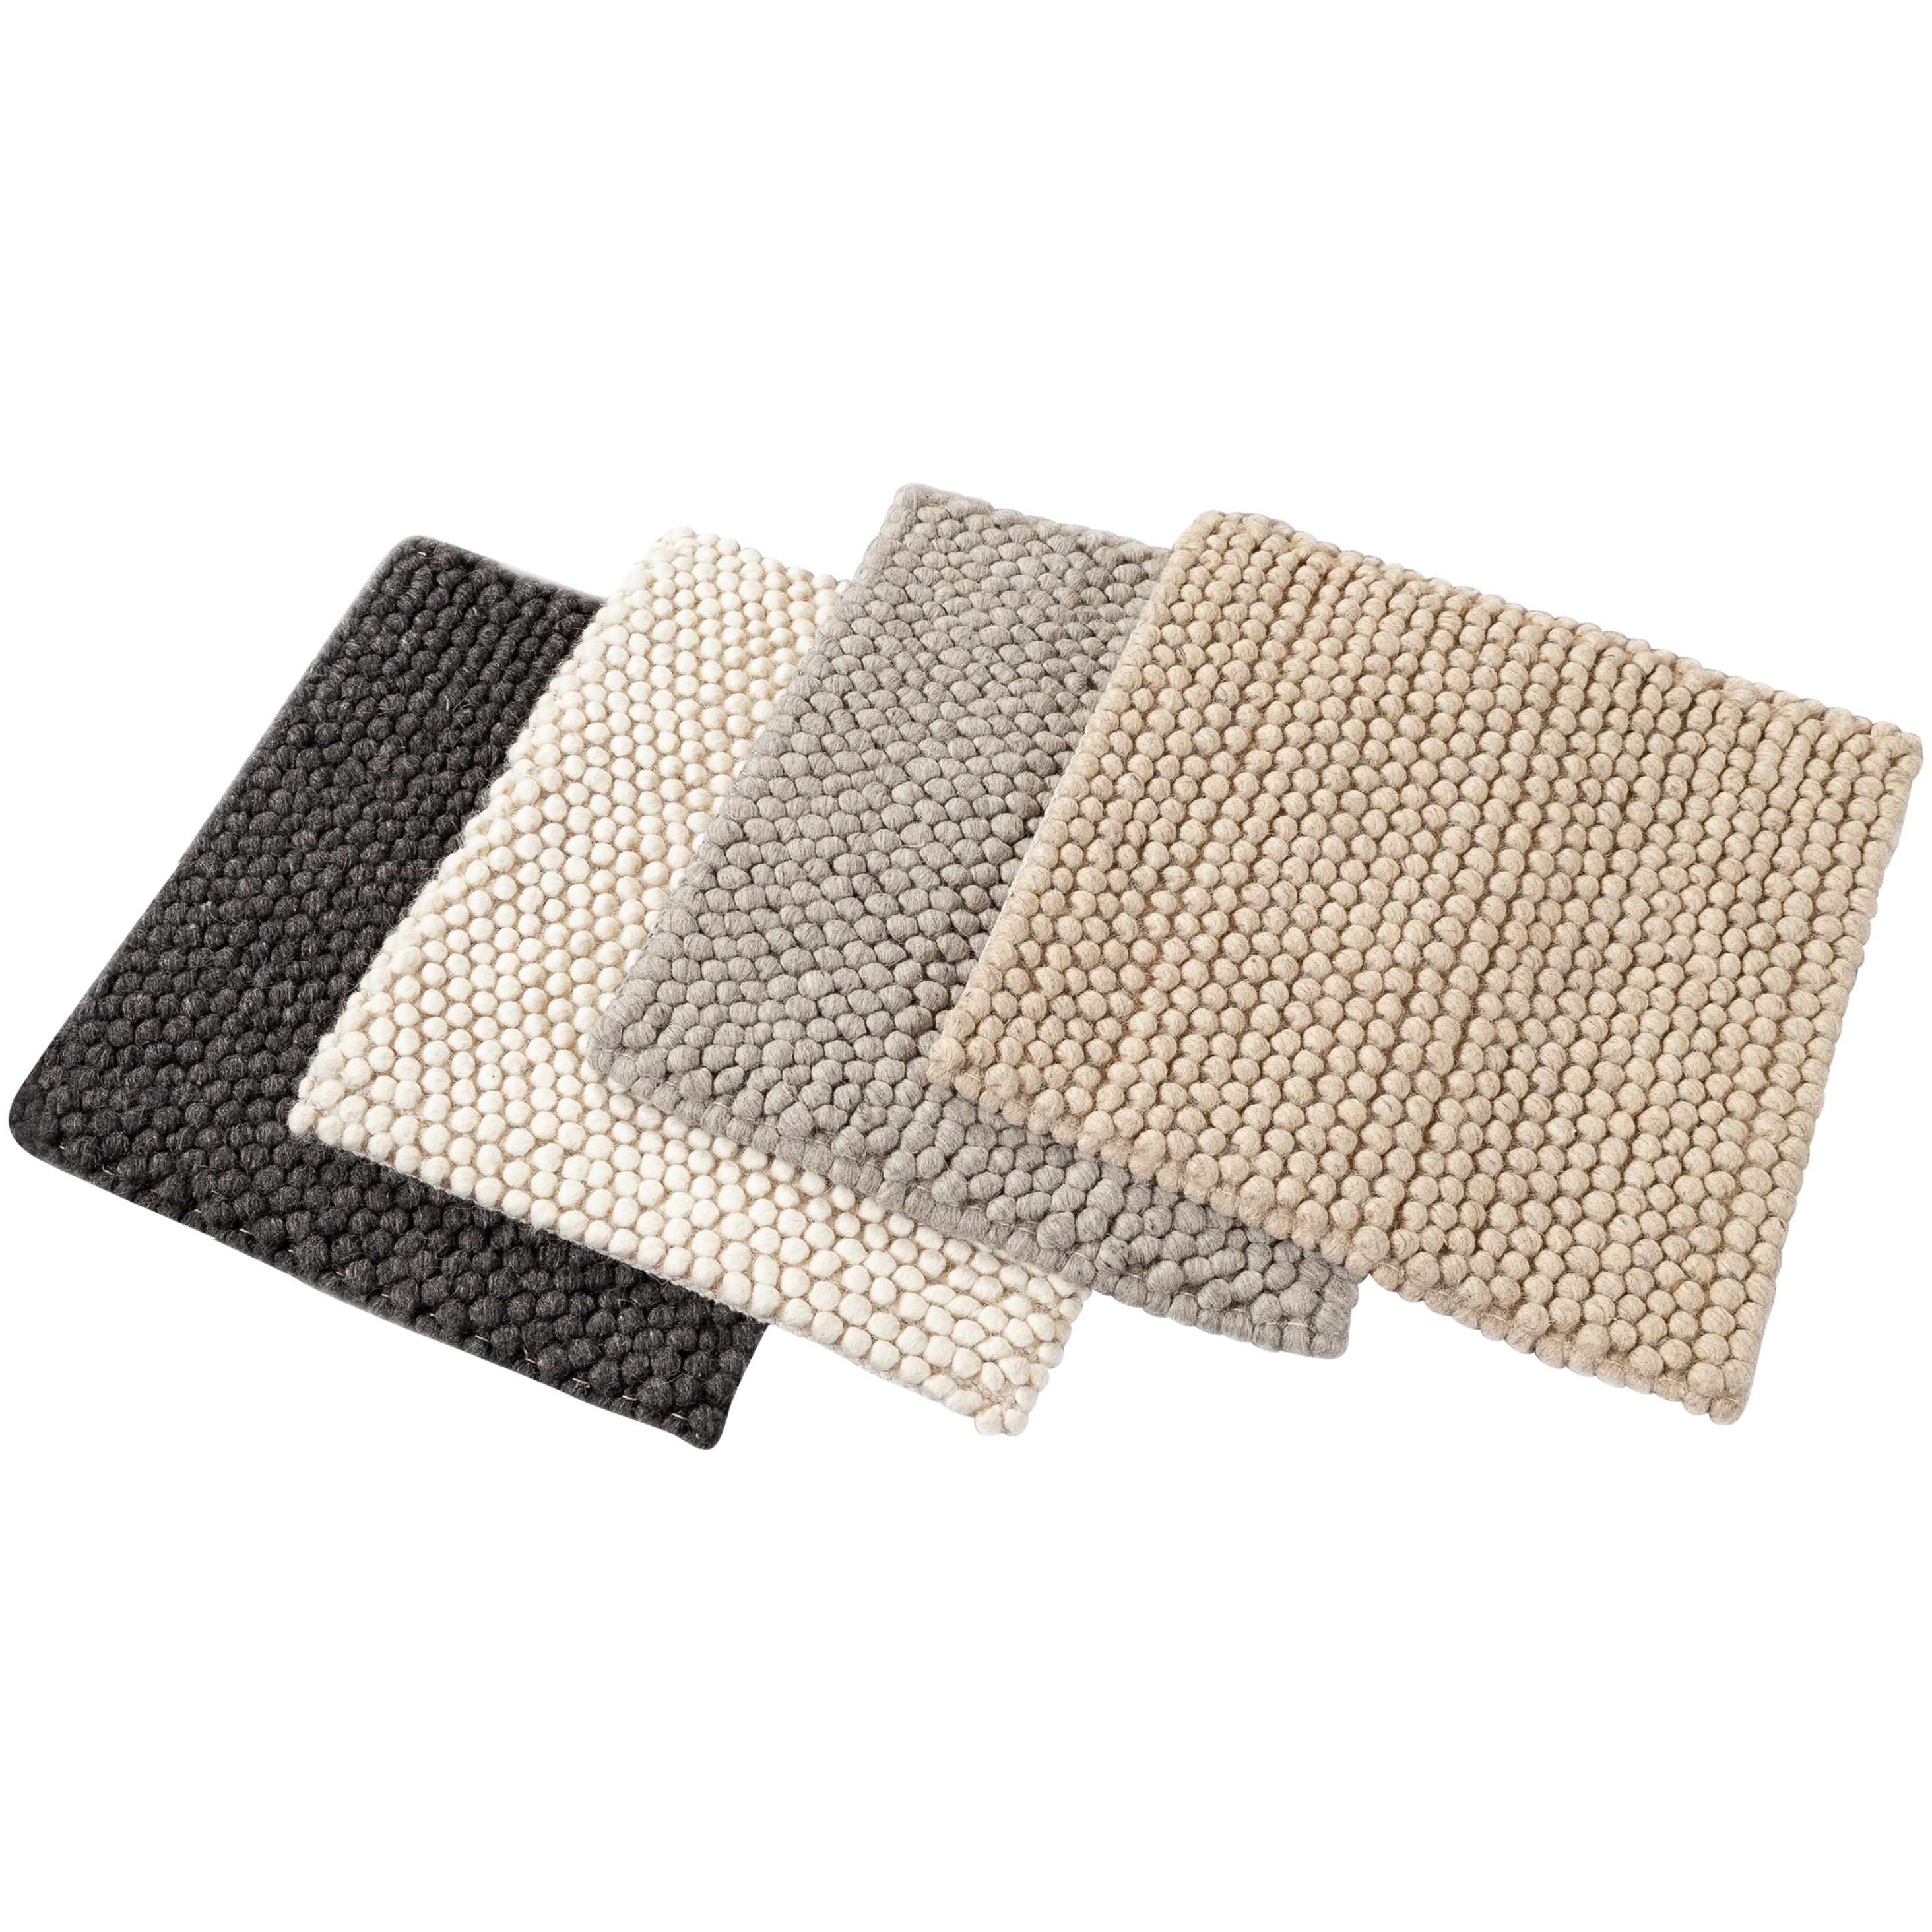 Solid-Colored Wool Textured Custom Rug For Sale